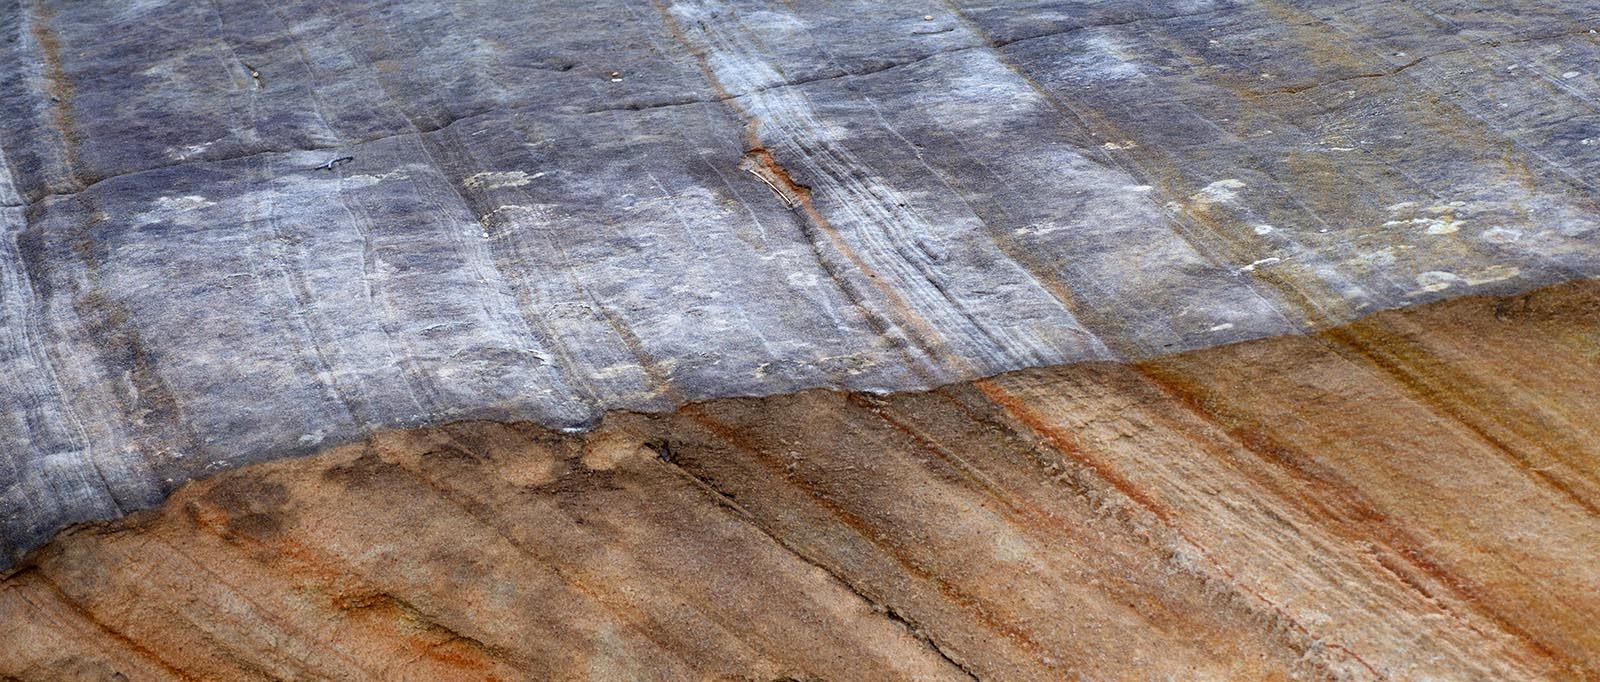 Checkerboard Mesa, fractured edge of sandstone layers derived from quartz sand deposited and moved by wind and water.